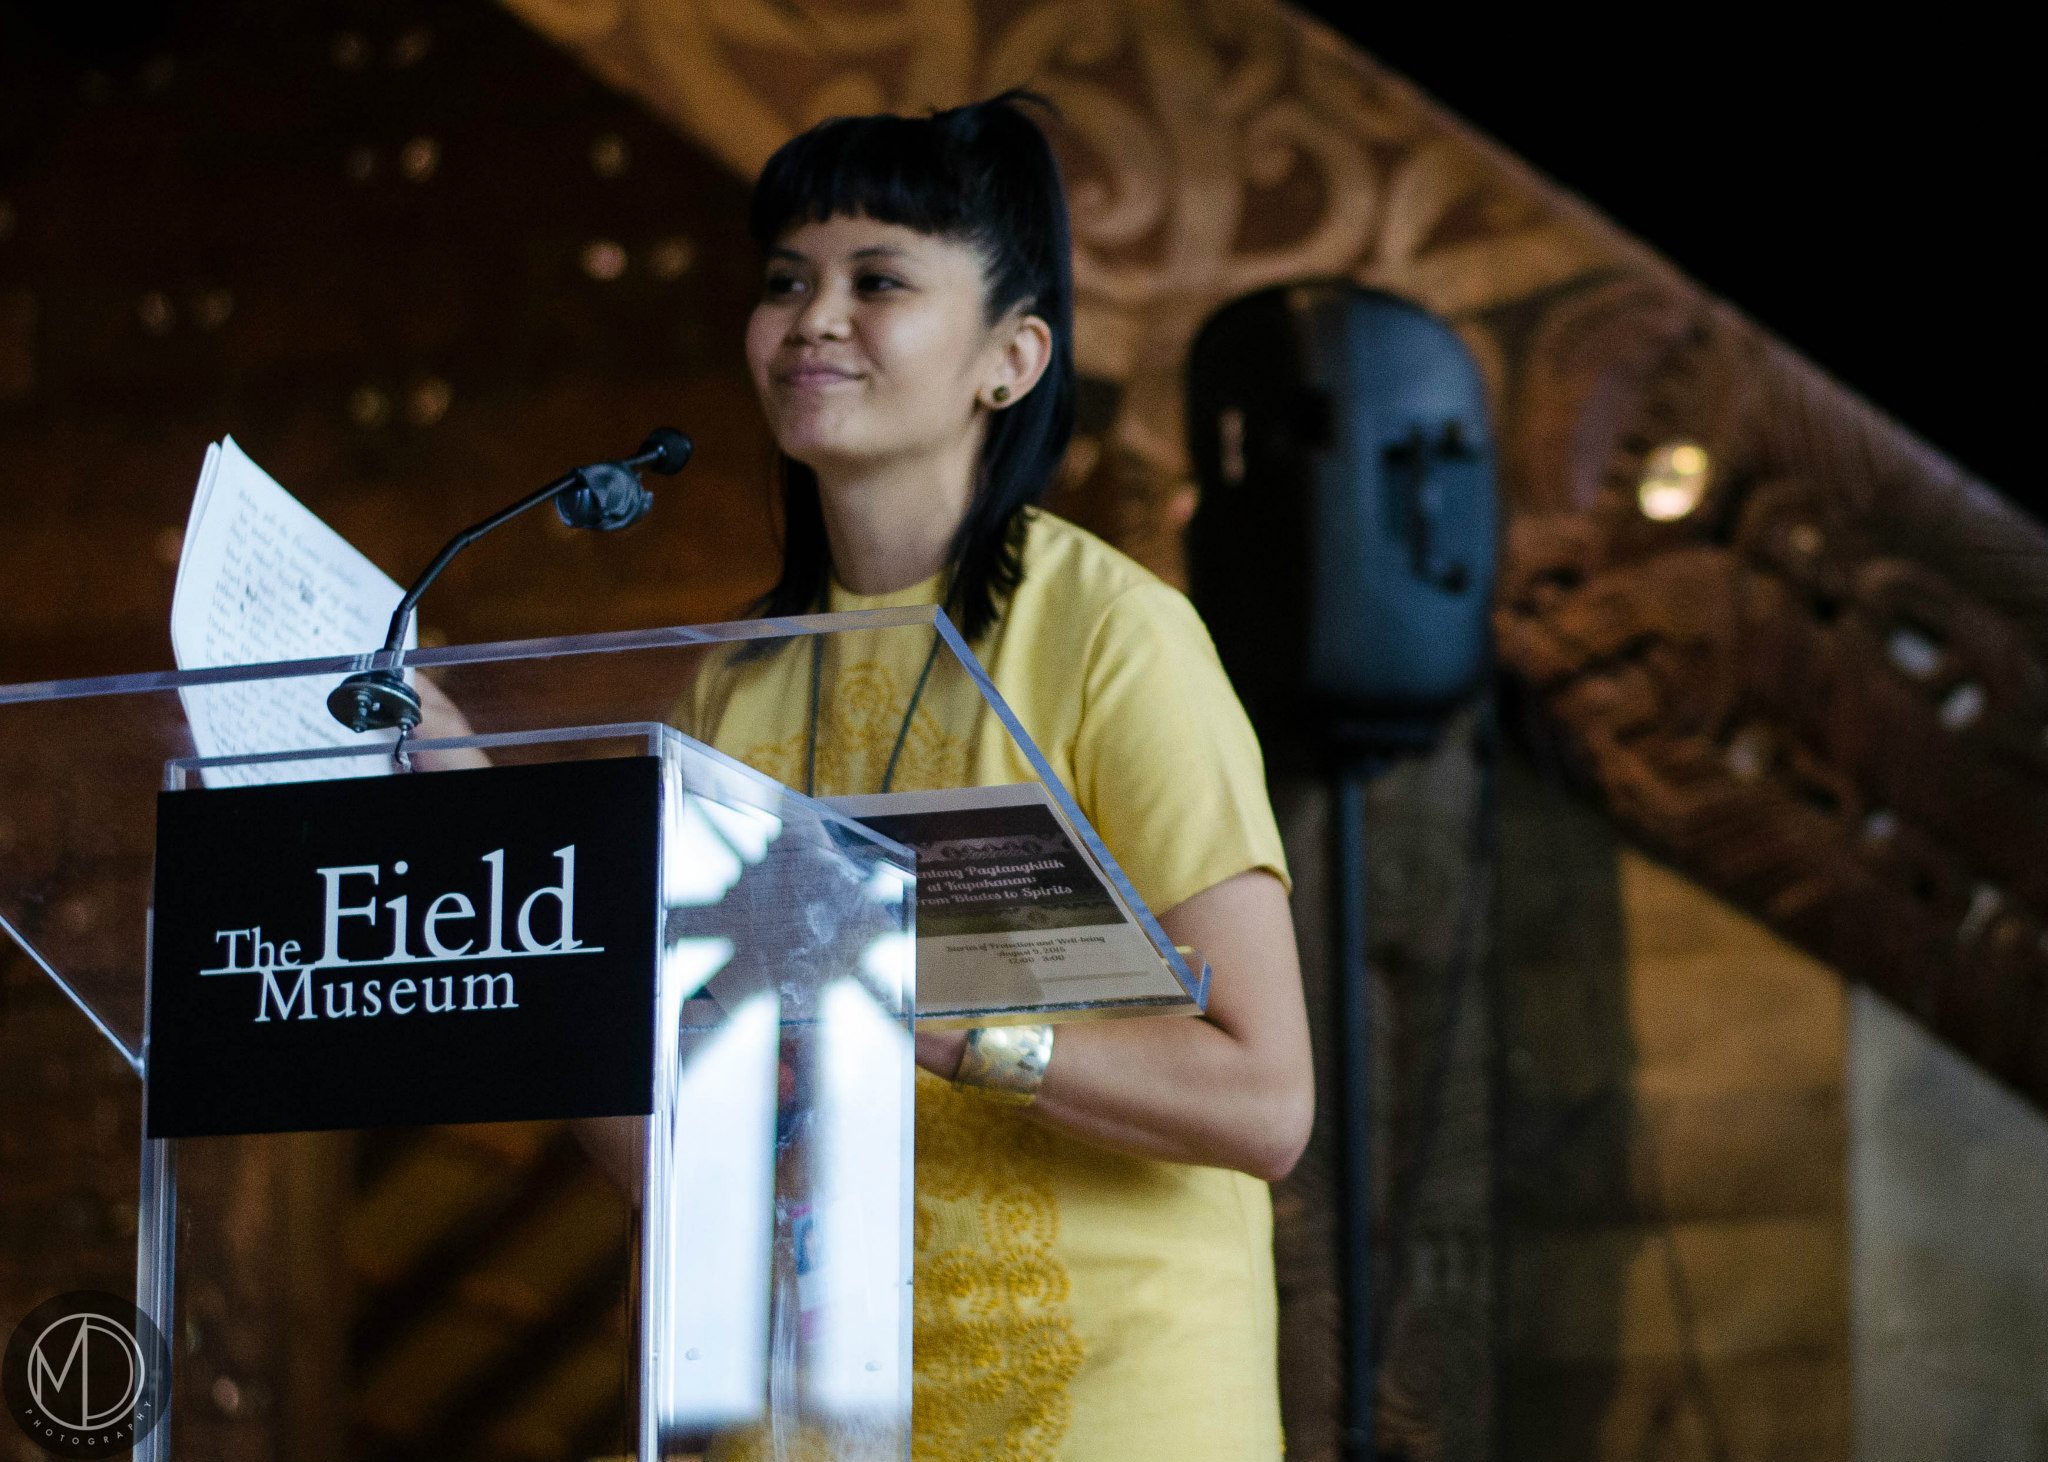 Trisha addressing the audience. (c) Field Museum of Natural History - CC BY-NC 4.0